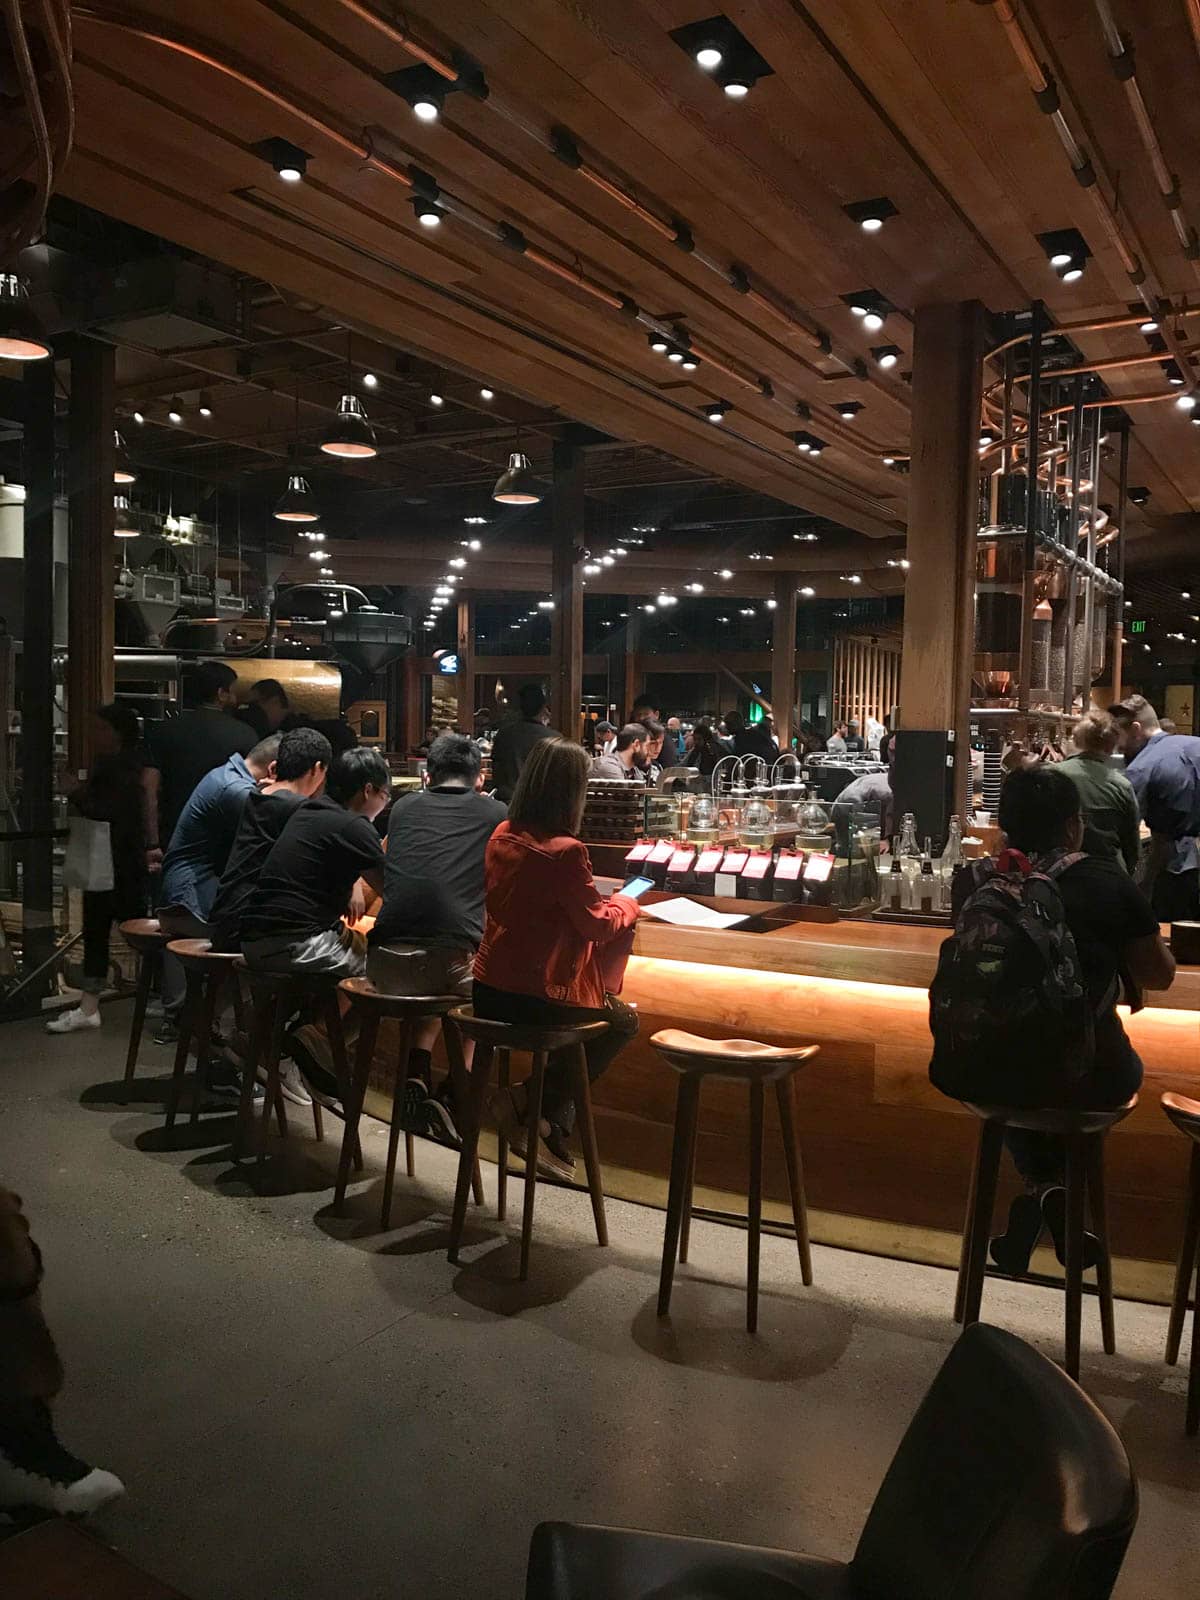 People sitting on high chairs at a high table inside of a cafe. Someone can be seeing working behind the bar. The place is dimly lit with artificial lighting.